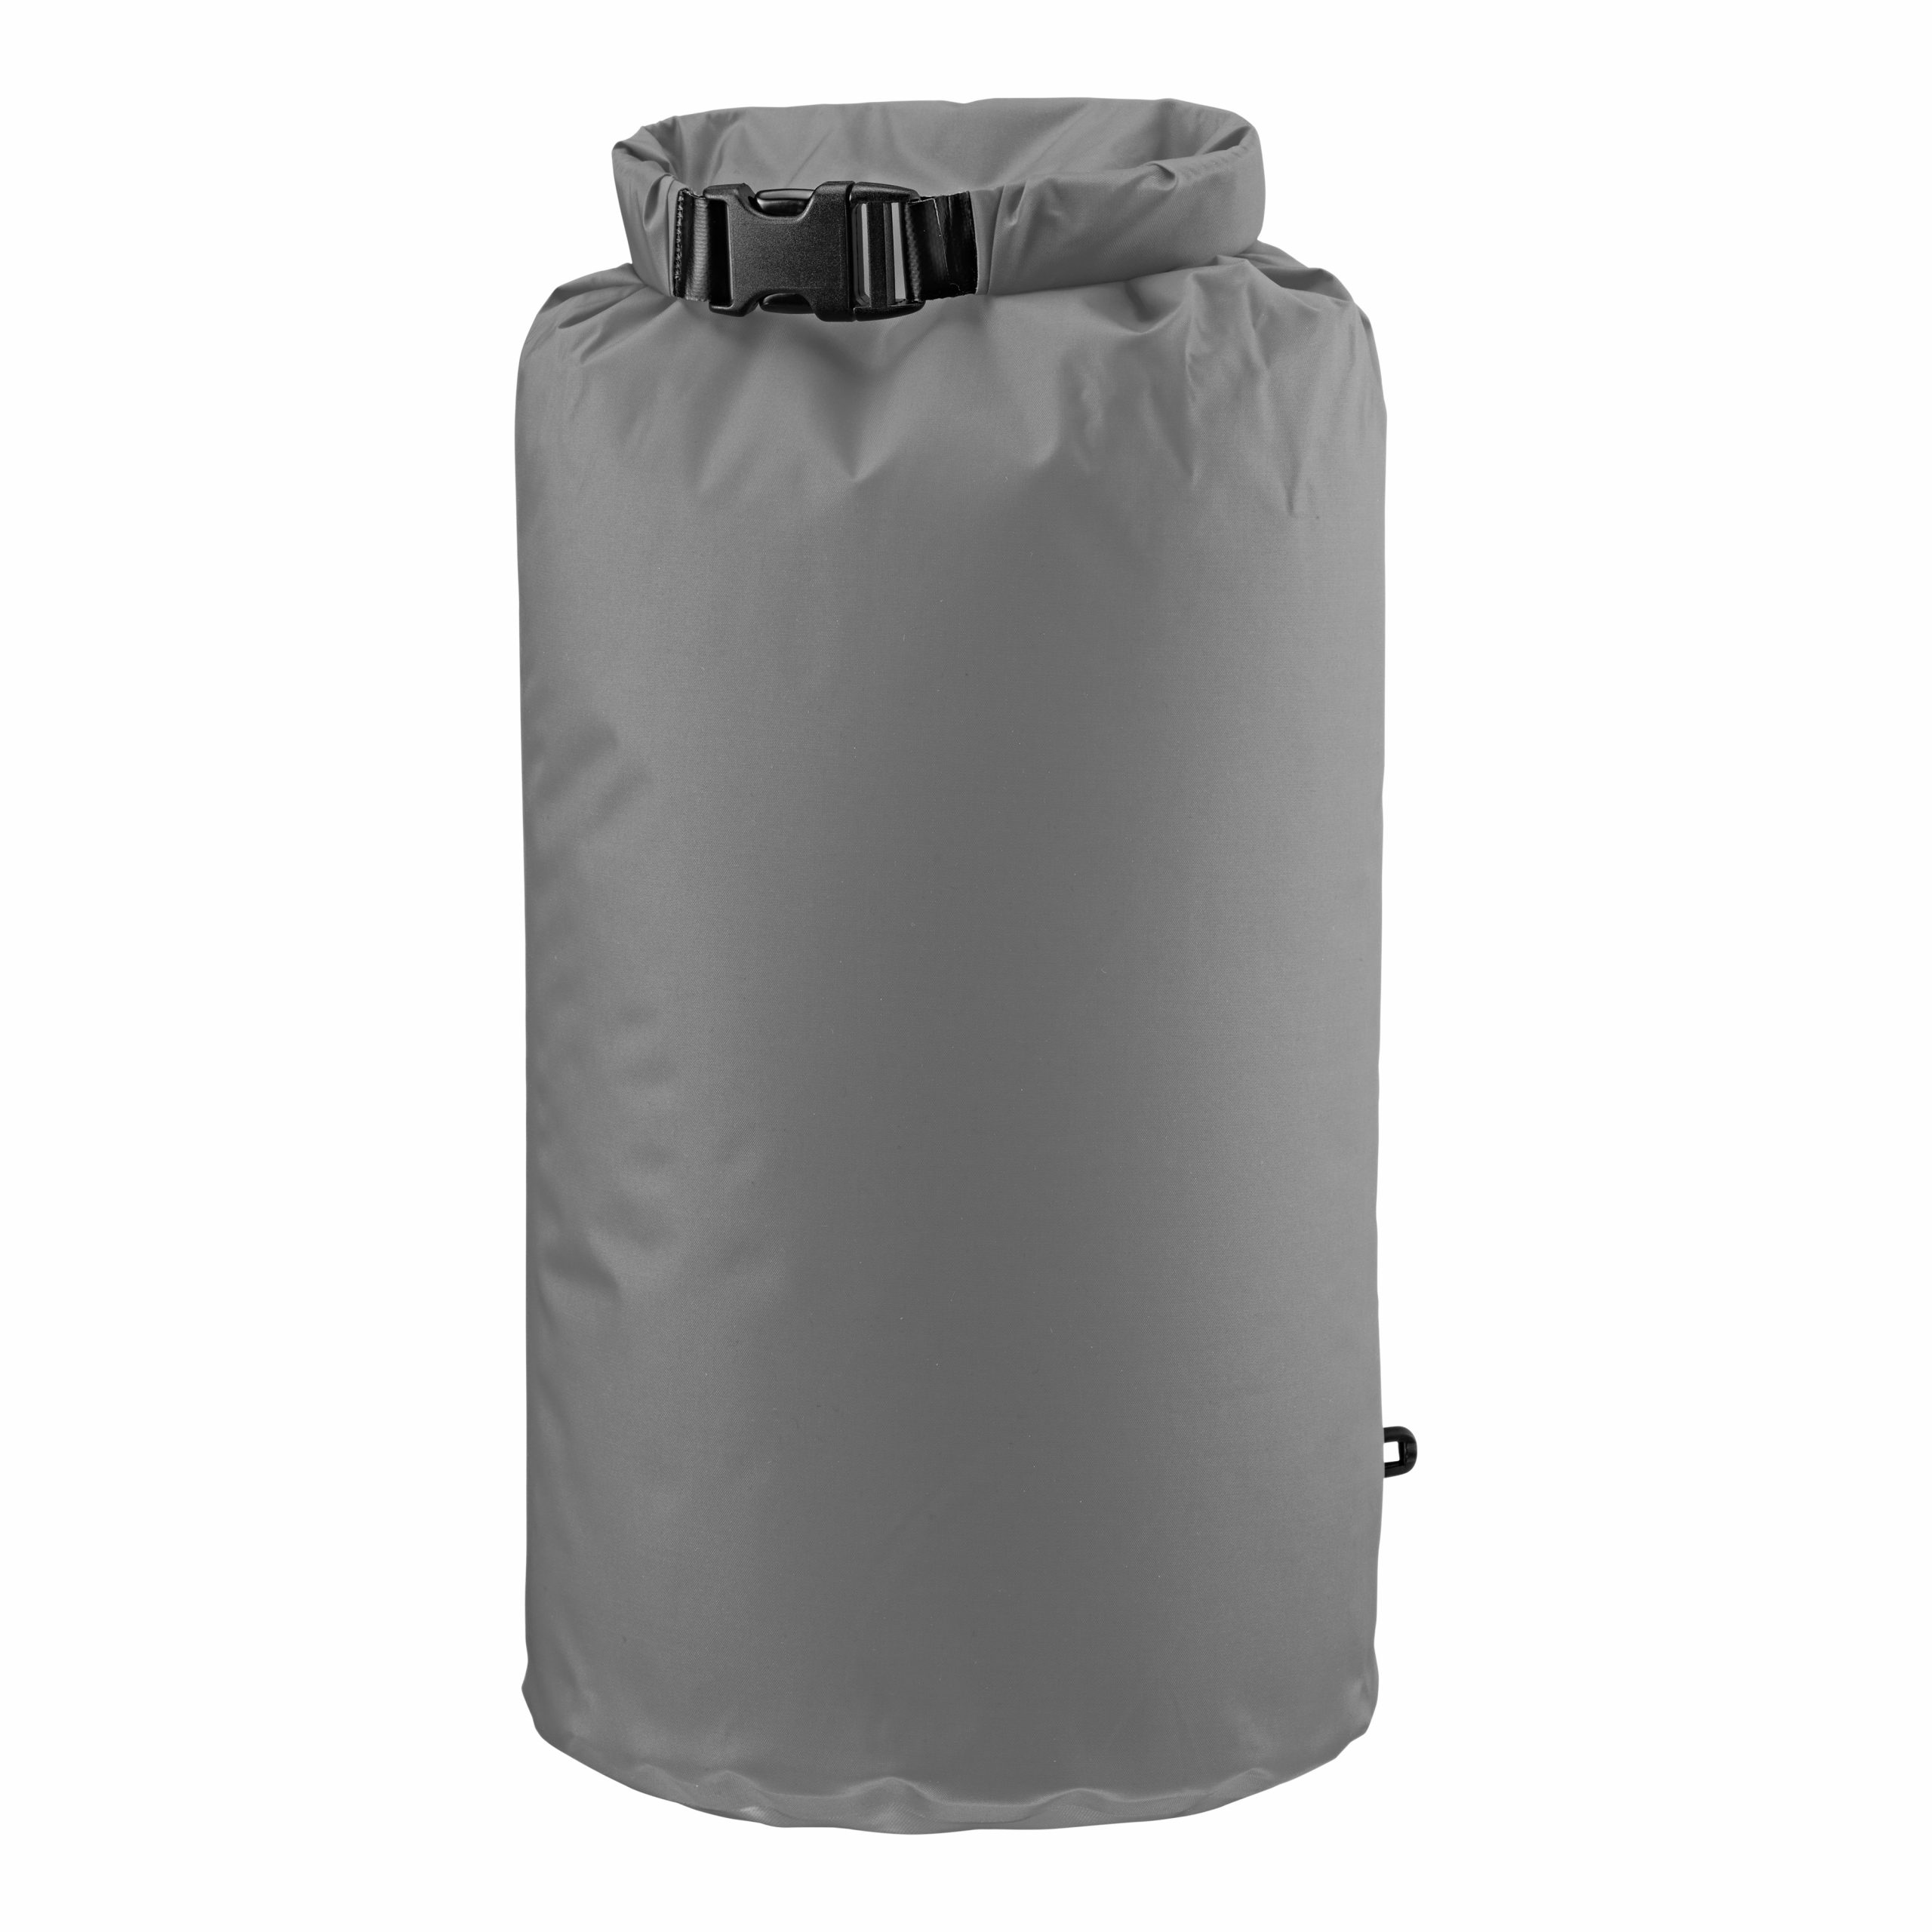 How to Make Your Sleeping Bag Smaller – Ortlieb Compression Dry Bag Review